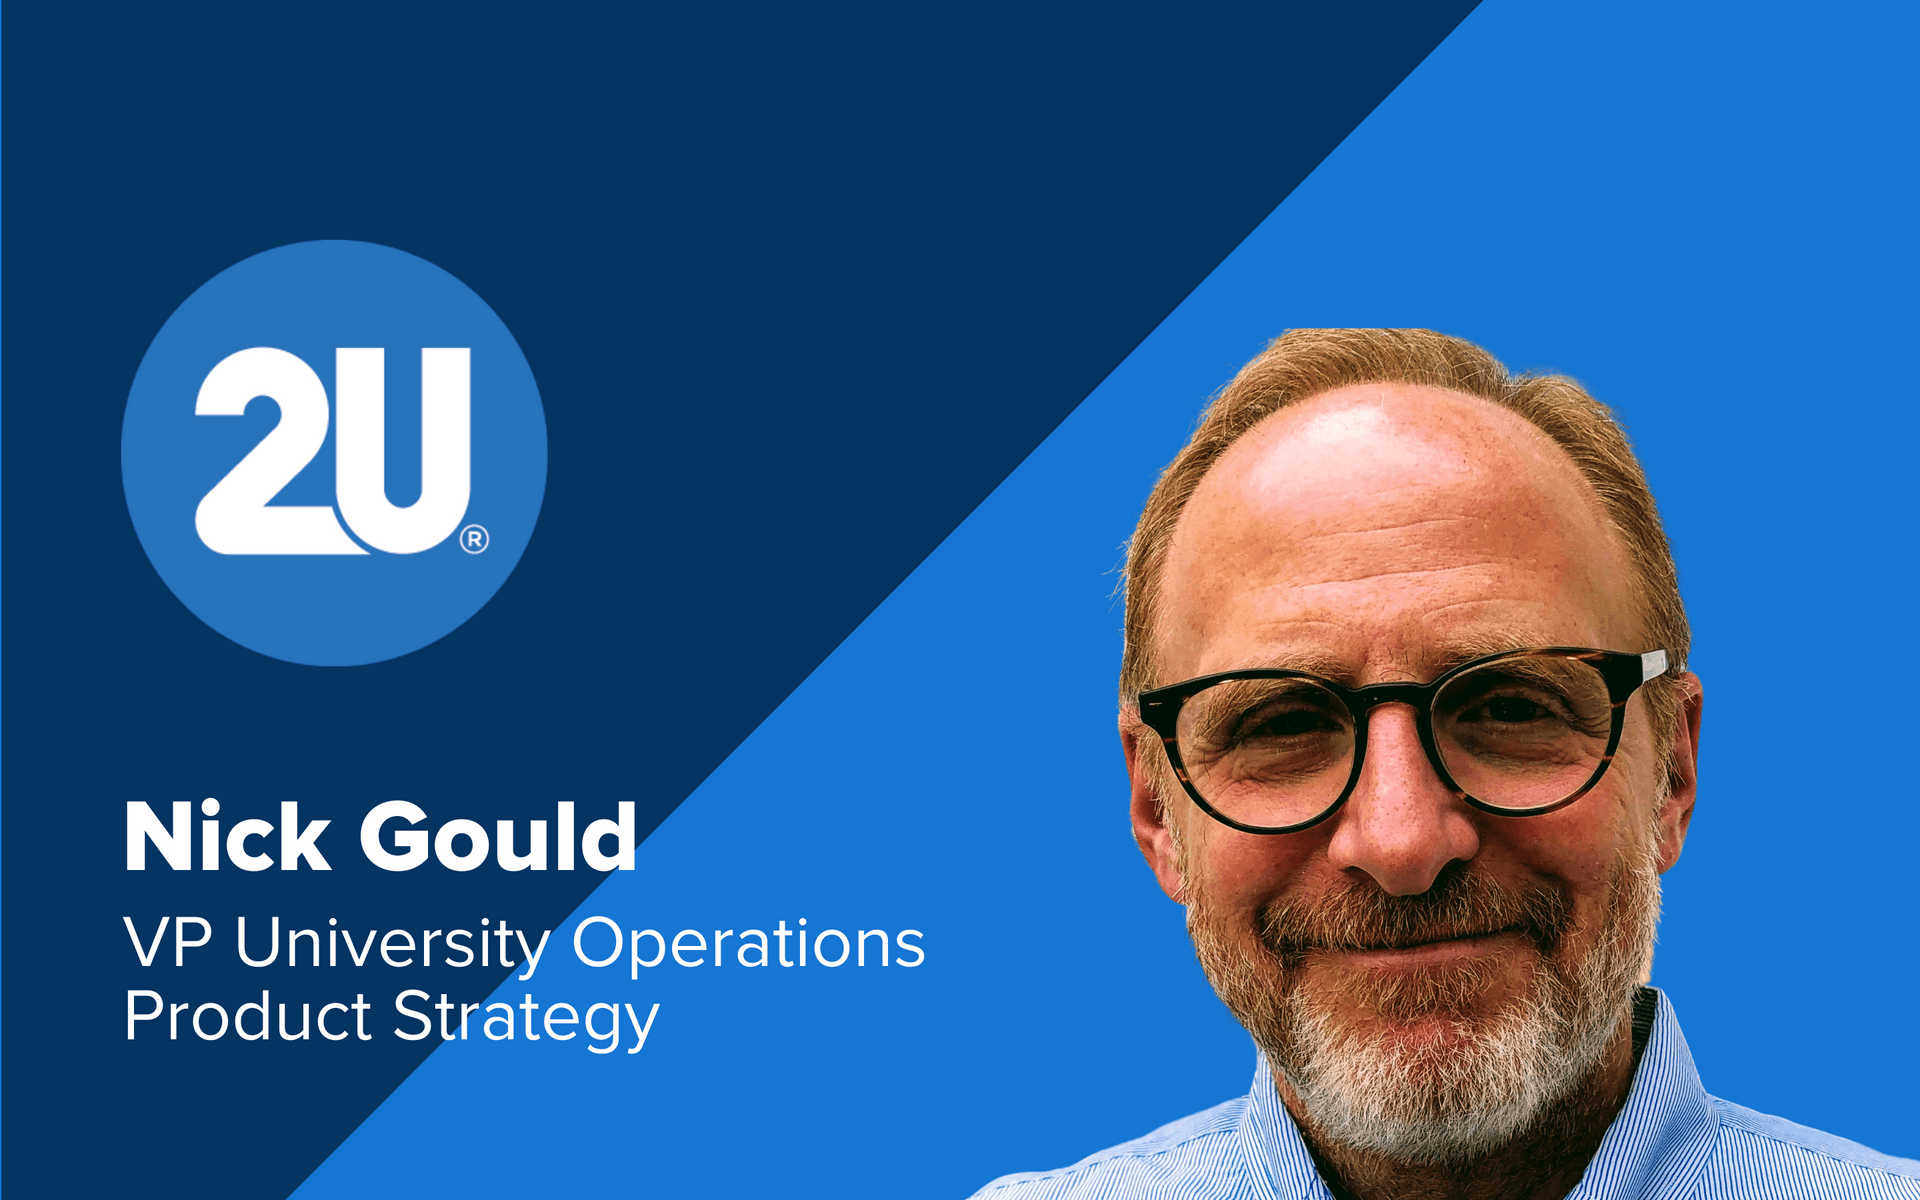 Nick Gould, Vice President of University Operations Product Strategy